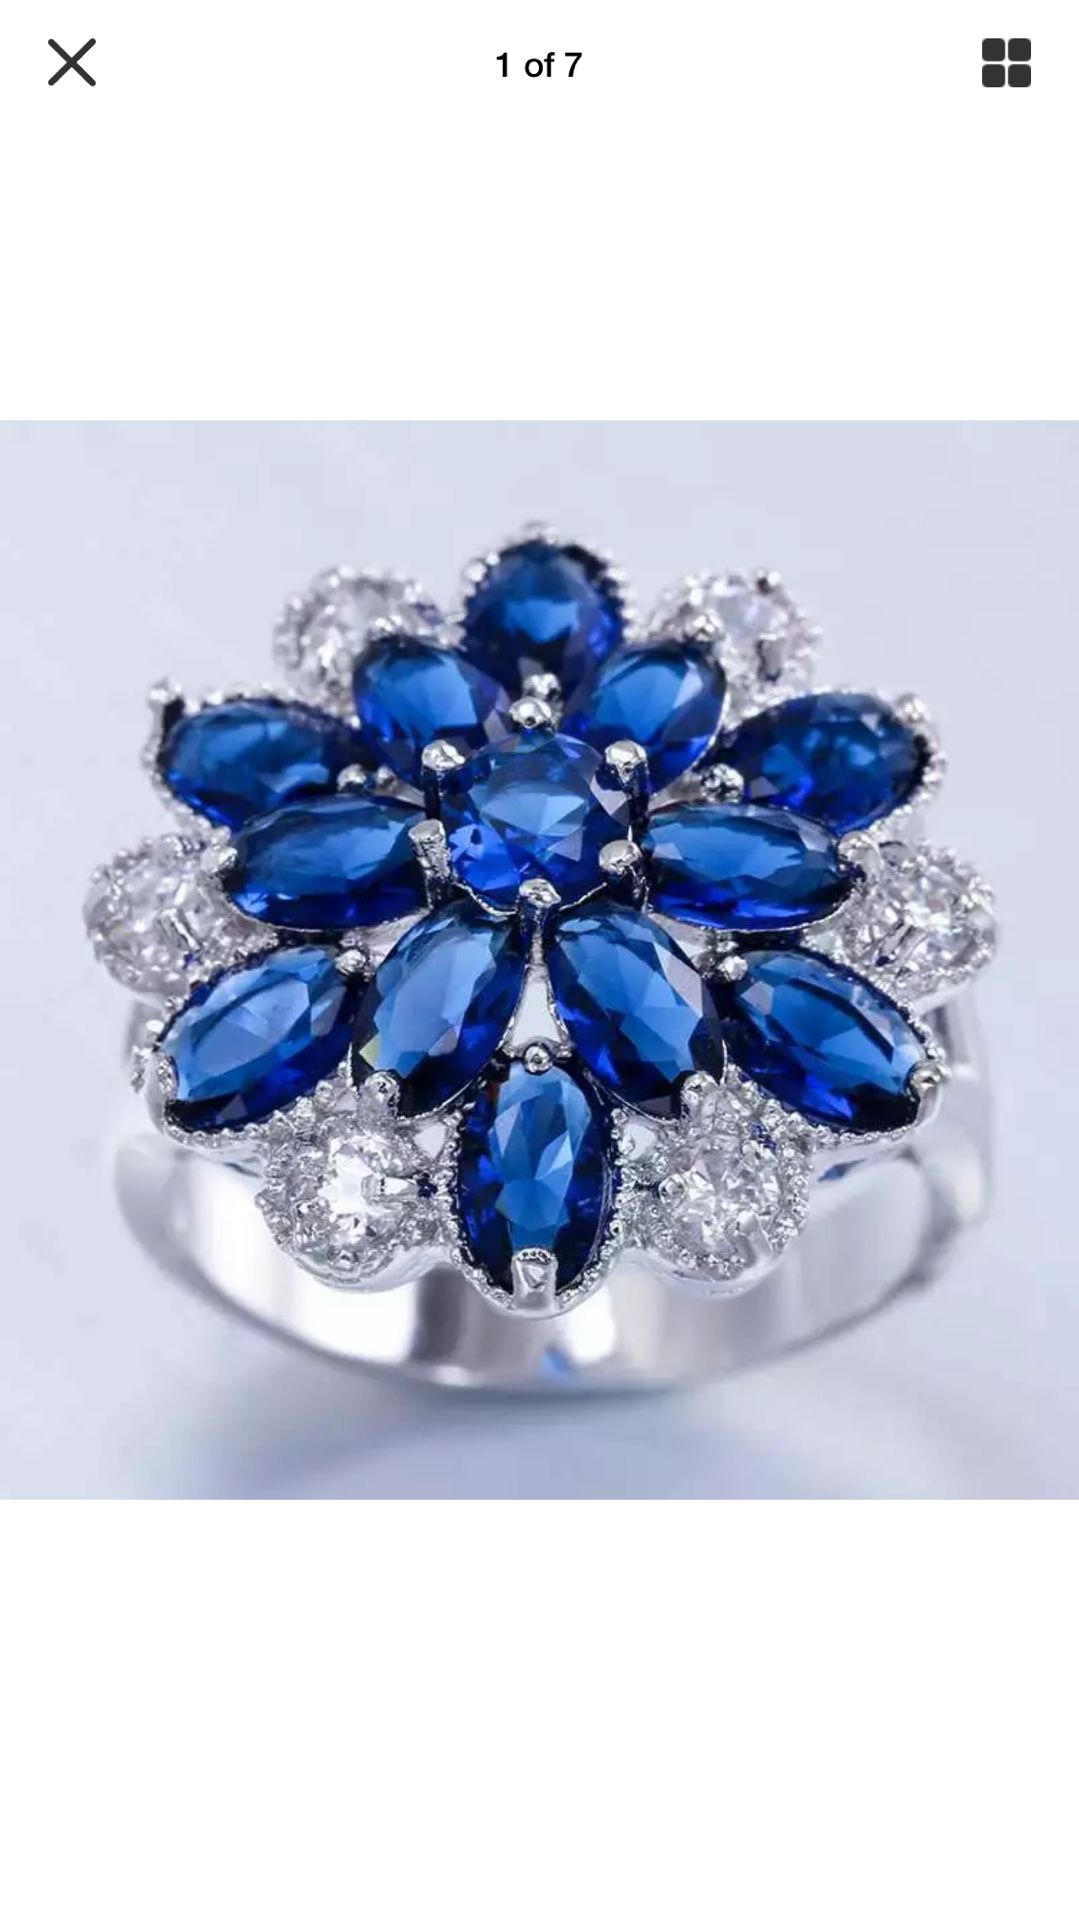 Blue & white teardrop sapphires flower cluster ring gorgeous !! On silver plated band sz7